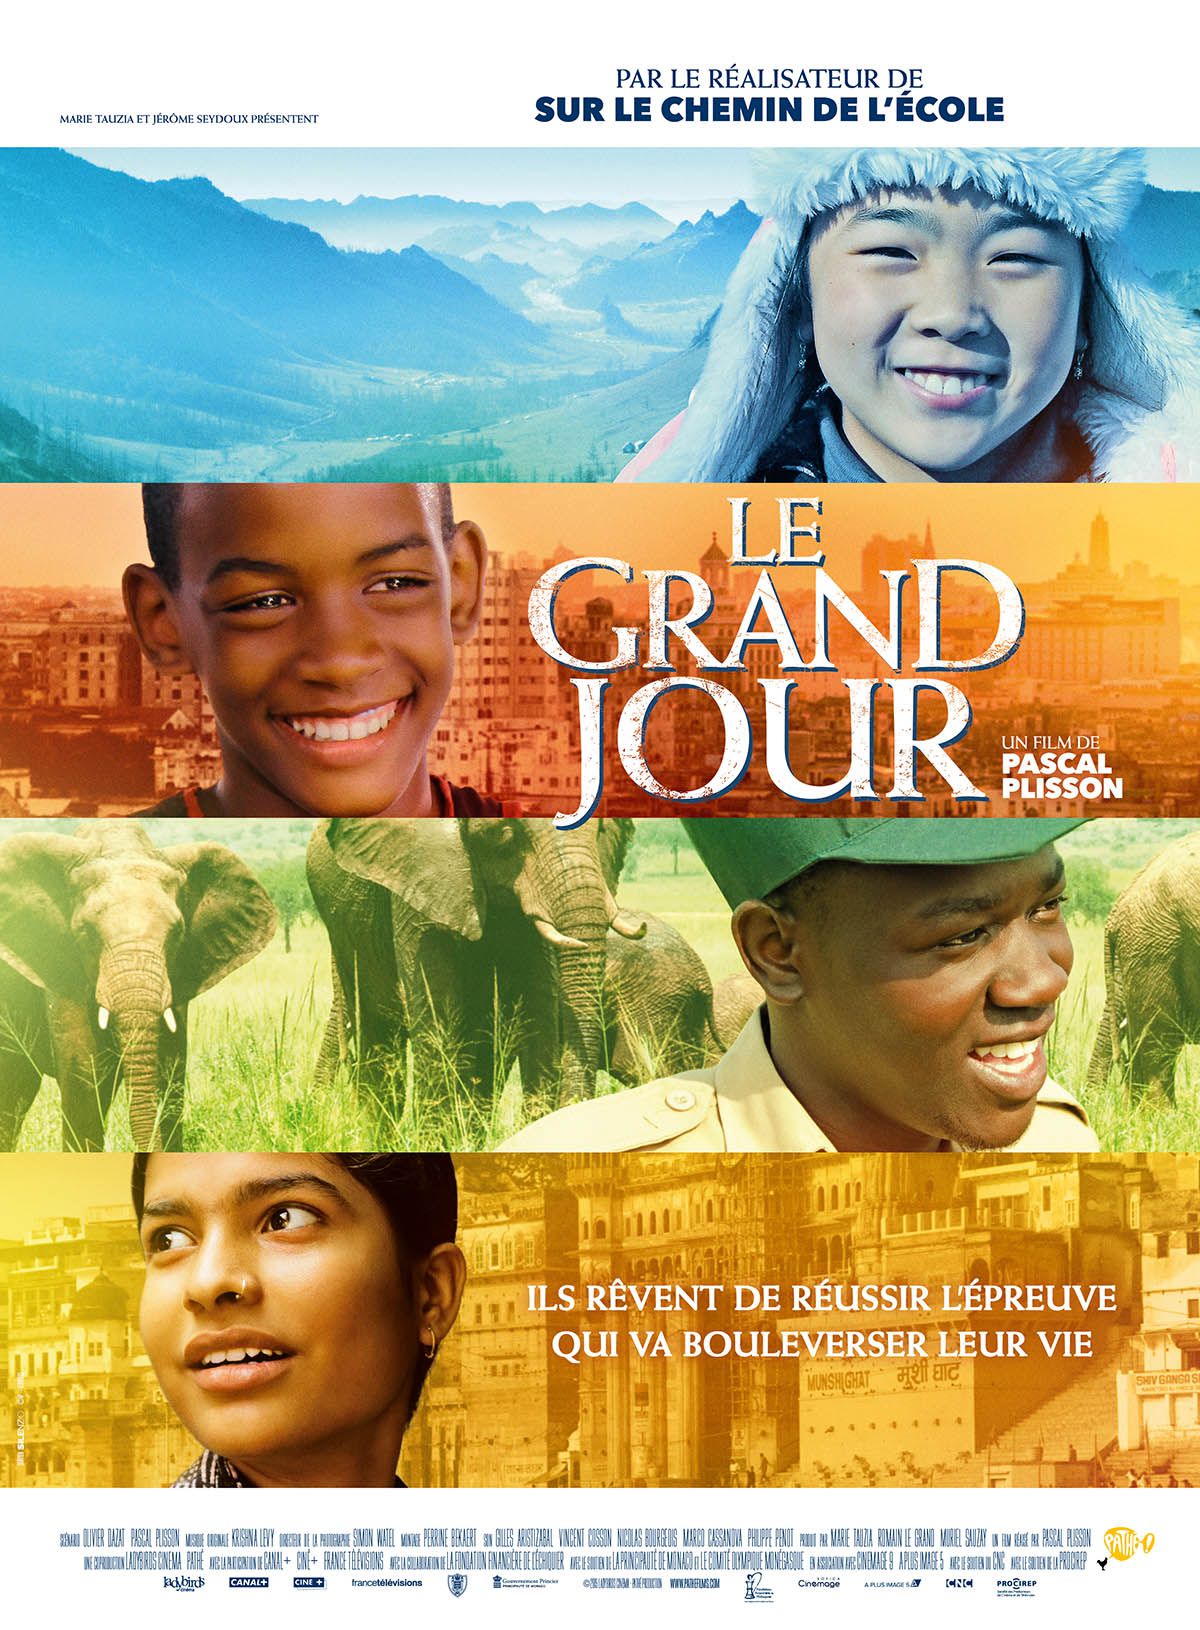 Le grand jour - Film (2015) streaming VF gratuit complet